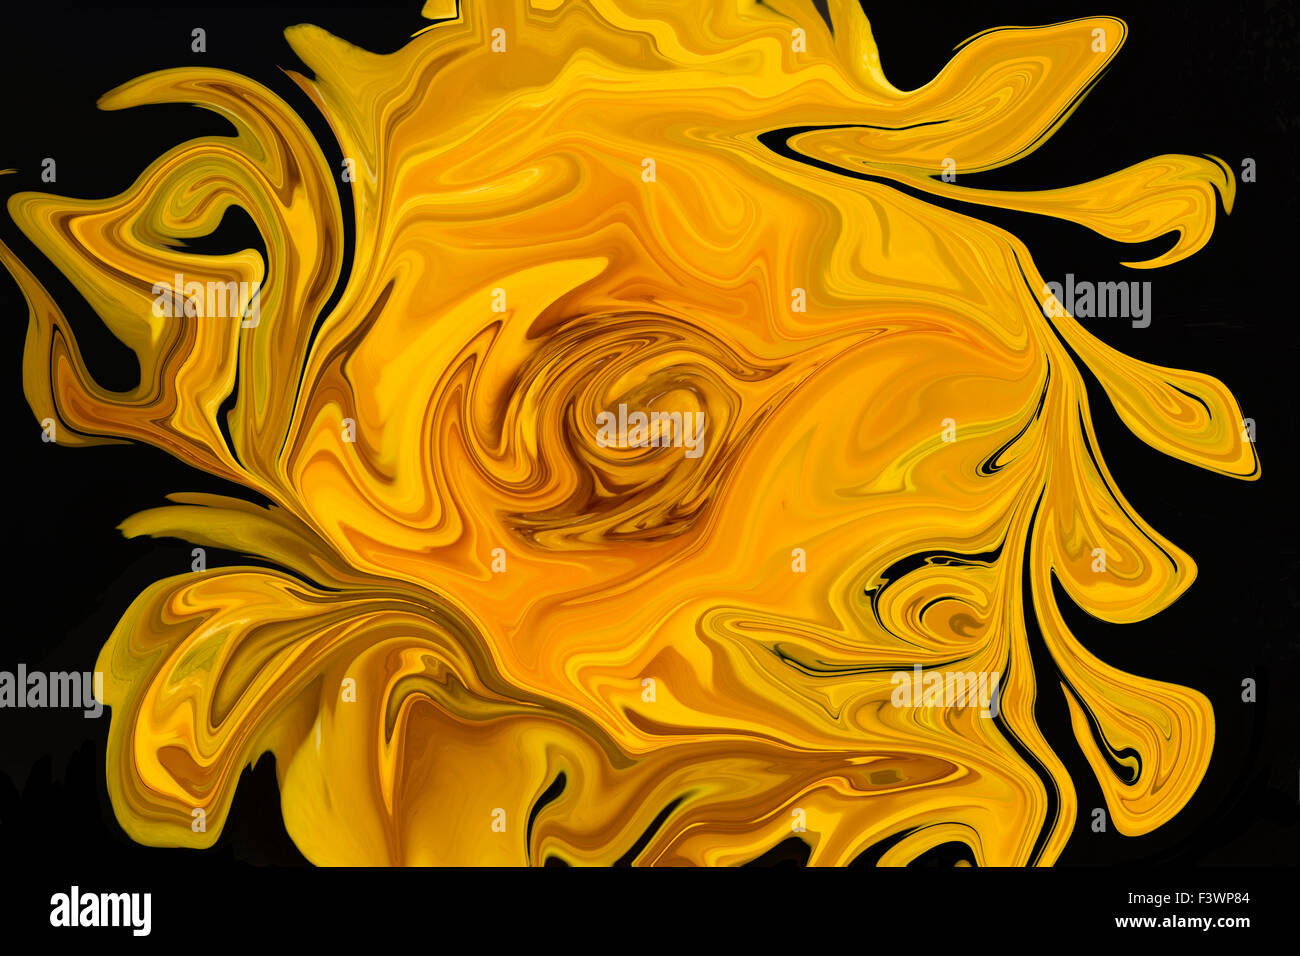 Abstract image, in hues of yellow on a black background Stock Photo